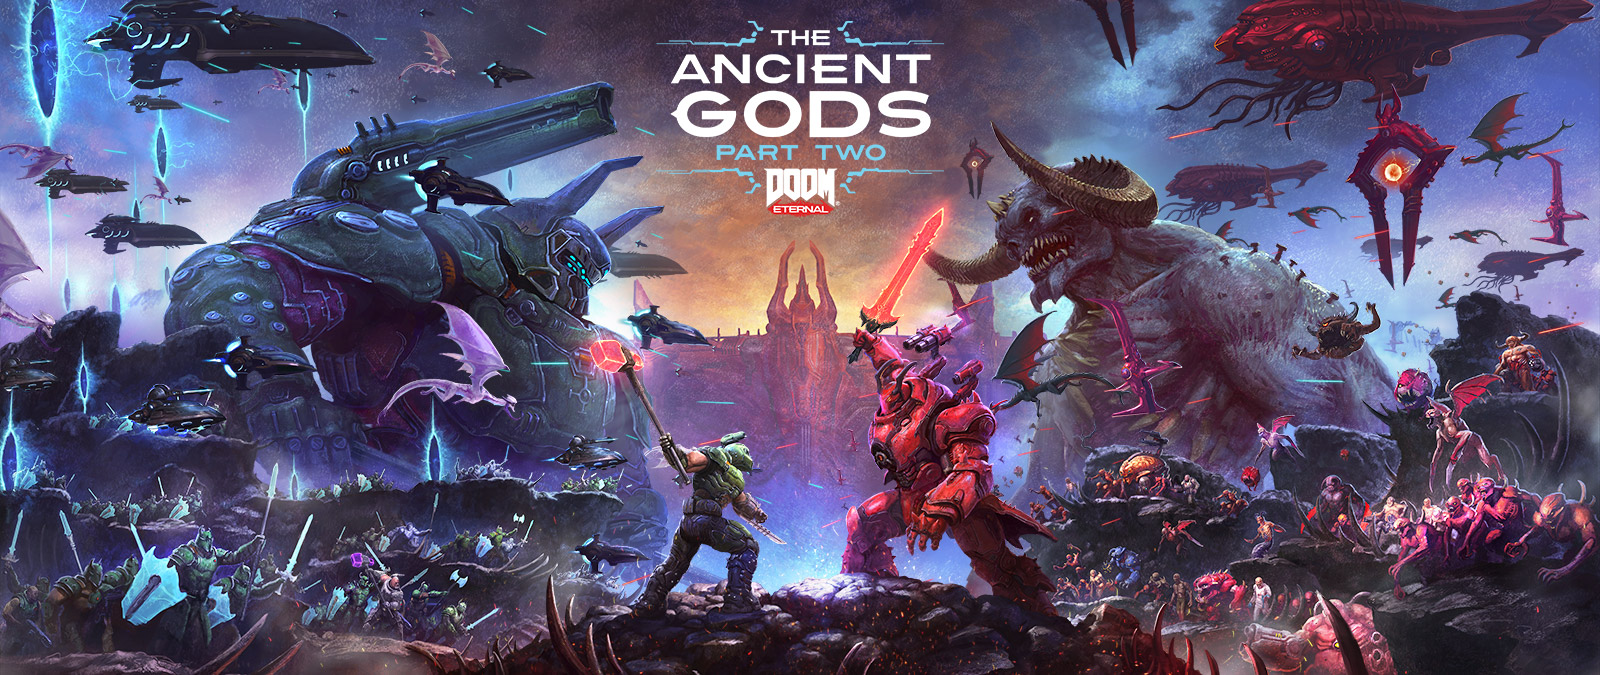 DOOM Eternal, The Ancient Gods Part Two, An epic battle between Slayers and Demons on a rocky hellscape. 